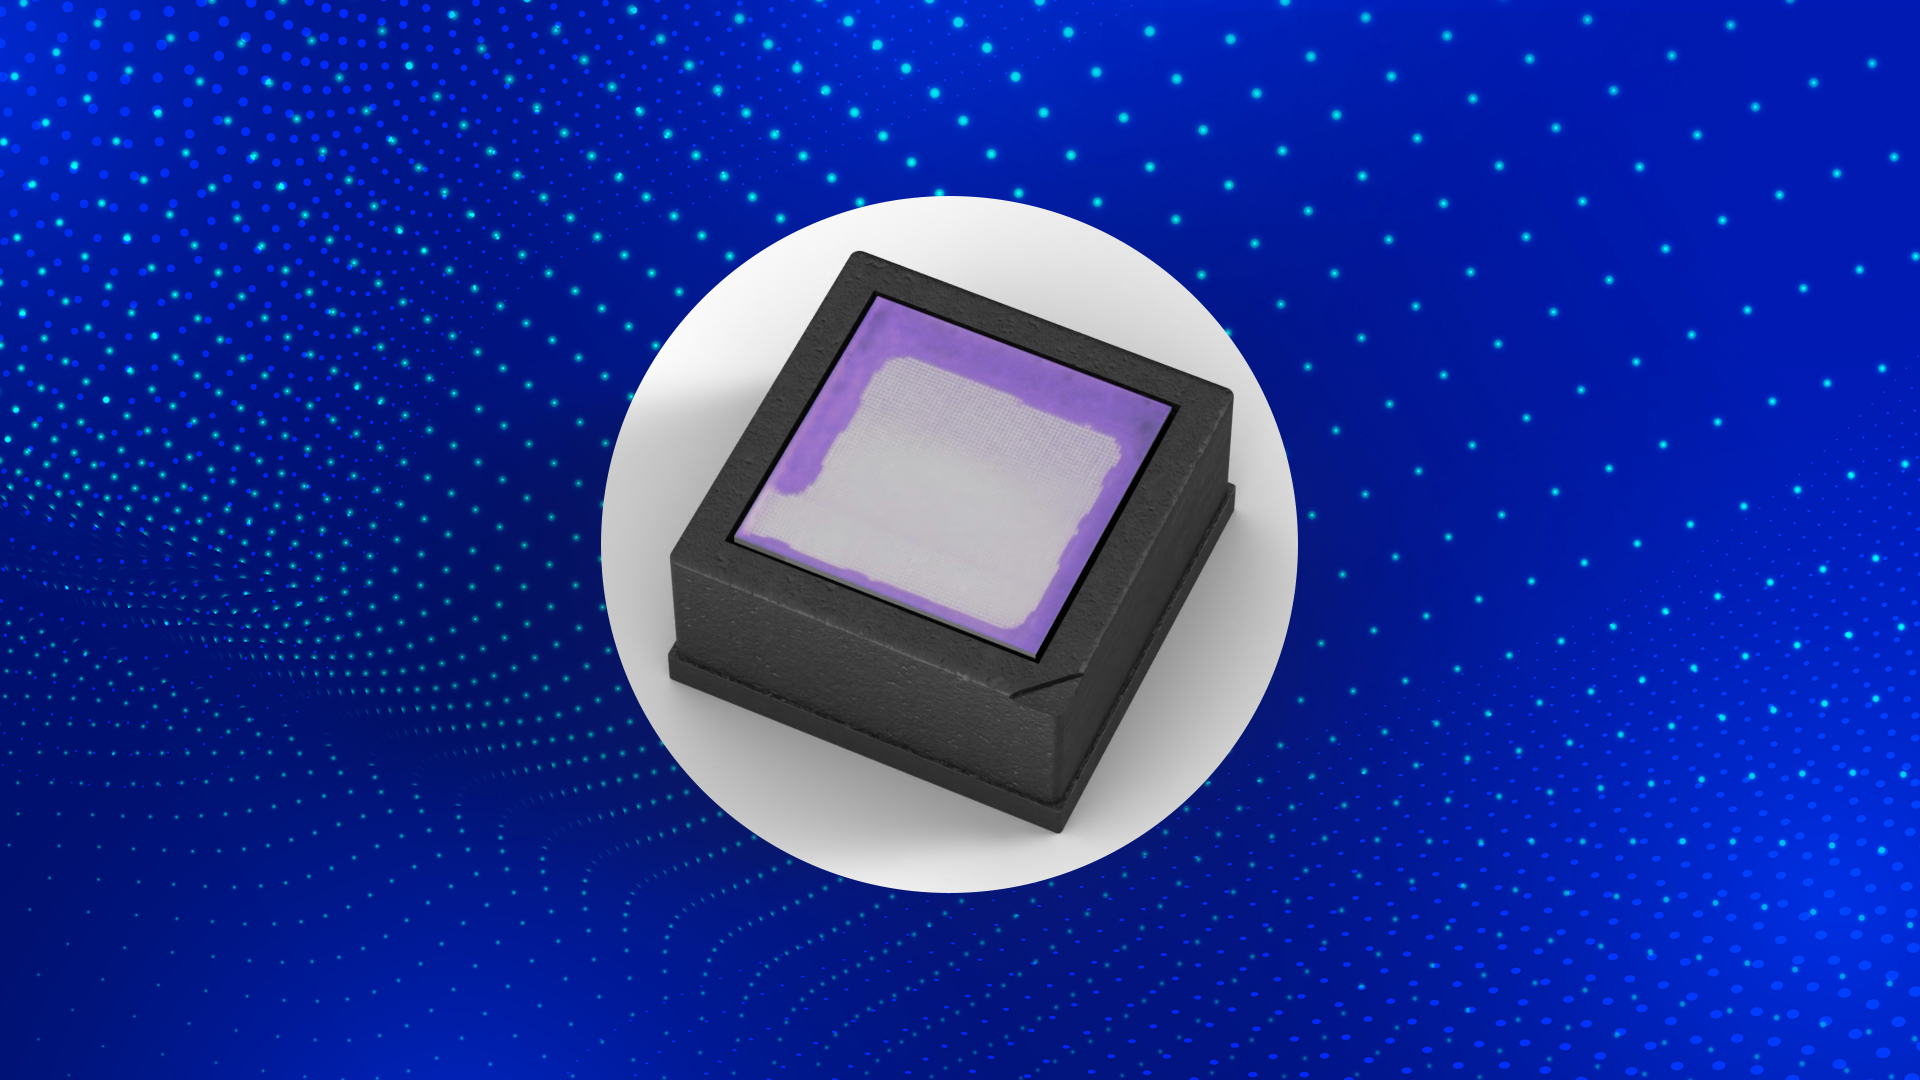 Dot projector modules from Coherent enable customers to design cameras that capture an entire scene at a broad angle and extended depth range even in bright outdoor lighting conditions, all while maintaining low power consumption.